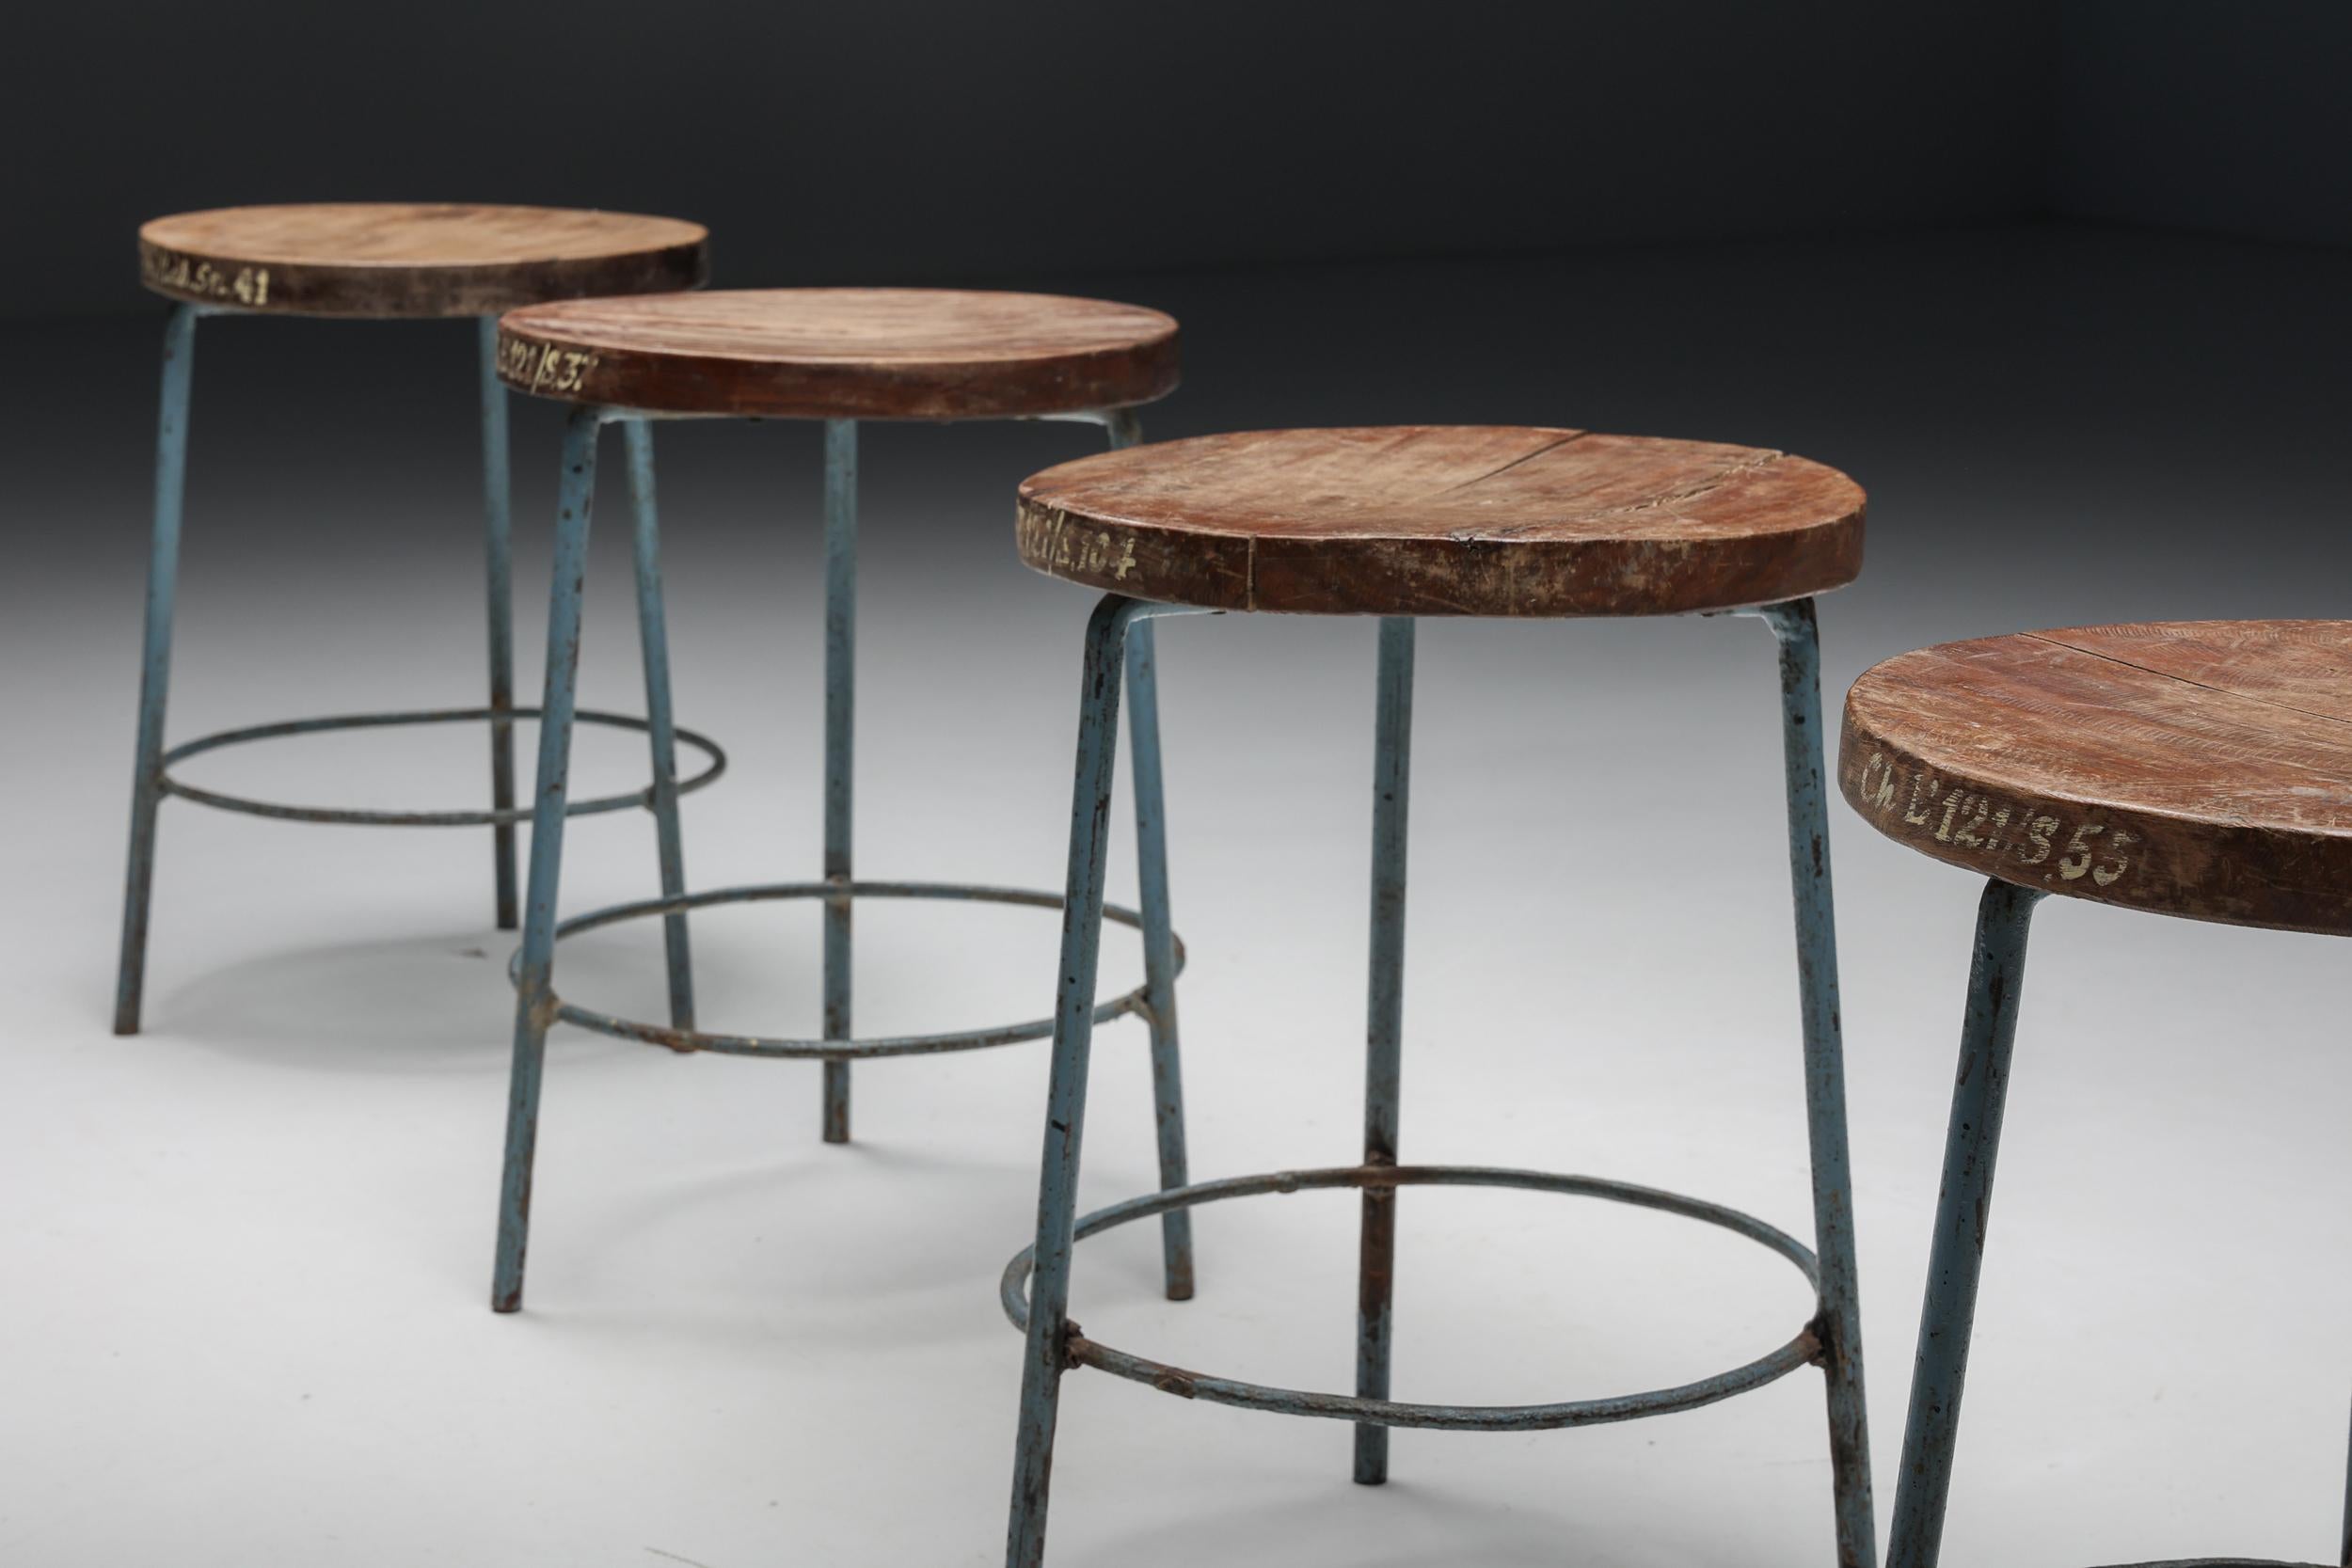 Pierre Jeanneret Chandigarh Stools, Metal & Wood, India, Patina, 1960's 6